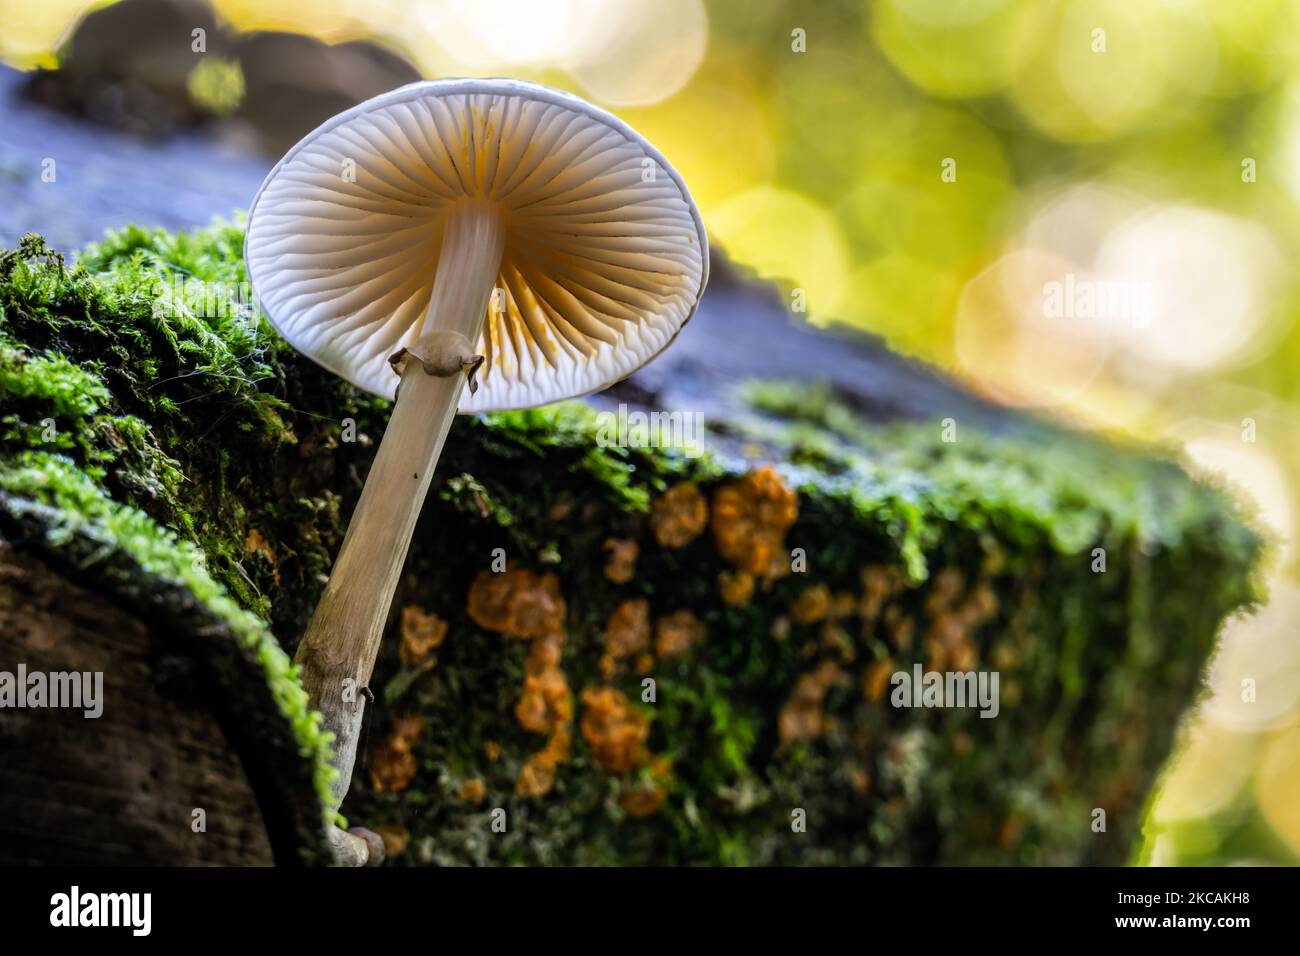 Backlit mushroom or fungus on a tree stump in autumn, close up Stock Photo